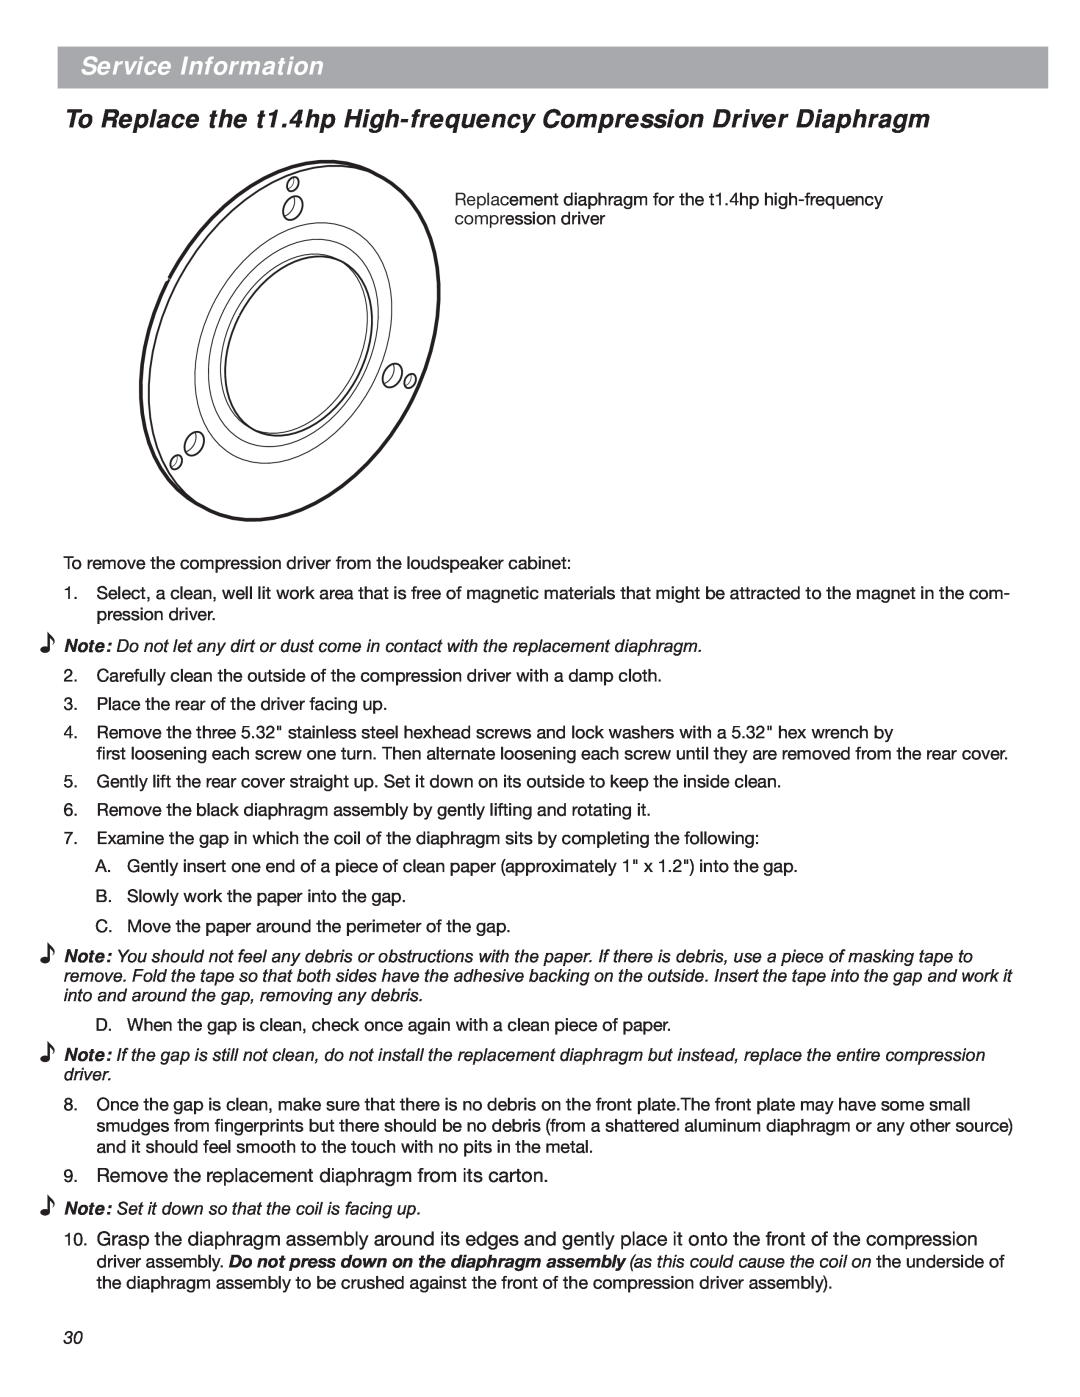 Bose LT Series III, Bose Panaray Loudspeakers manual Service Information, Note Set it down so that the coil is facing up 